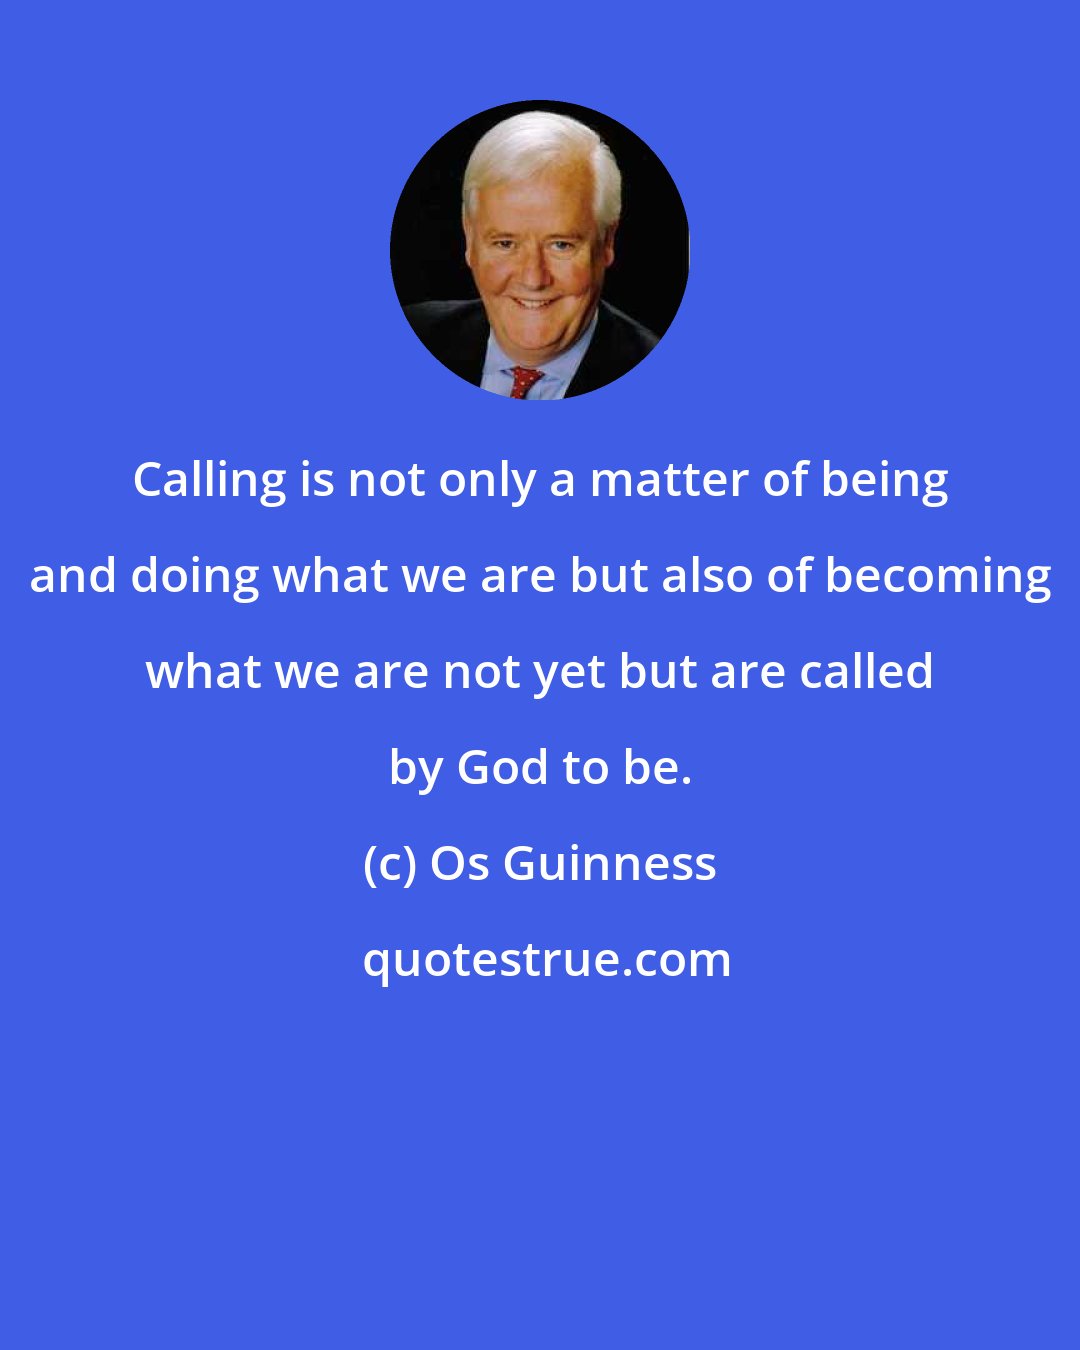 Os Guinness: Calling is not only a matter of being and doing what we are but also of becoming what we are not yet but are called by God to be.